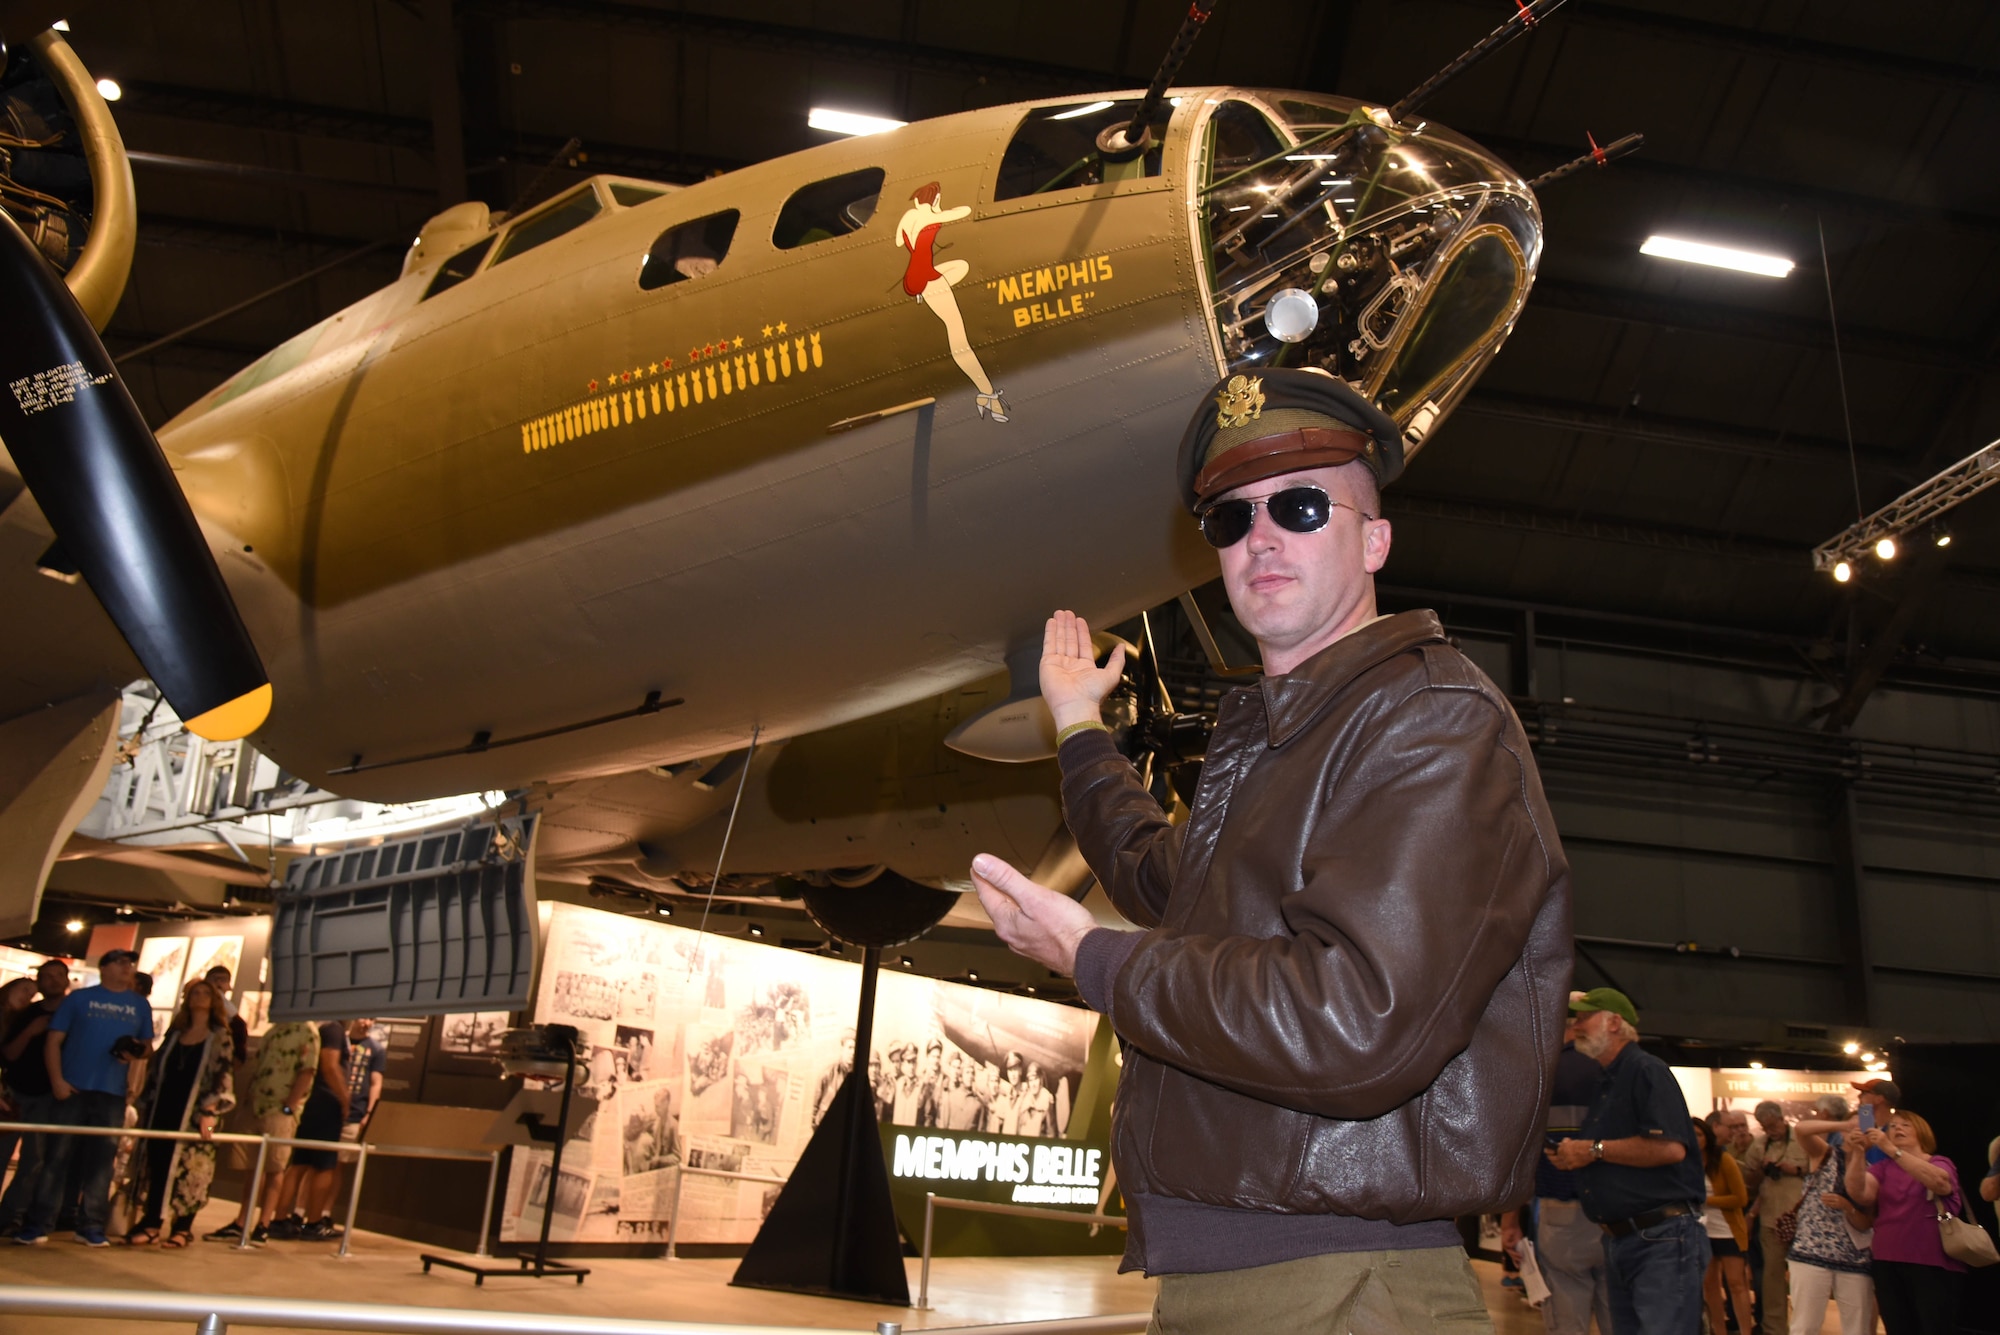 Over 160 military reenactors took part in the Memphis Belle exhibit opening events May 17-19, 2018. (U.S. Air Force photo by Ken LaRock)